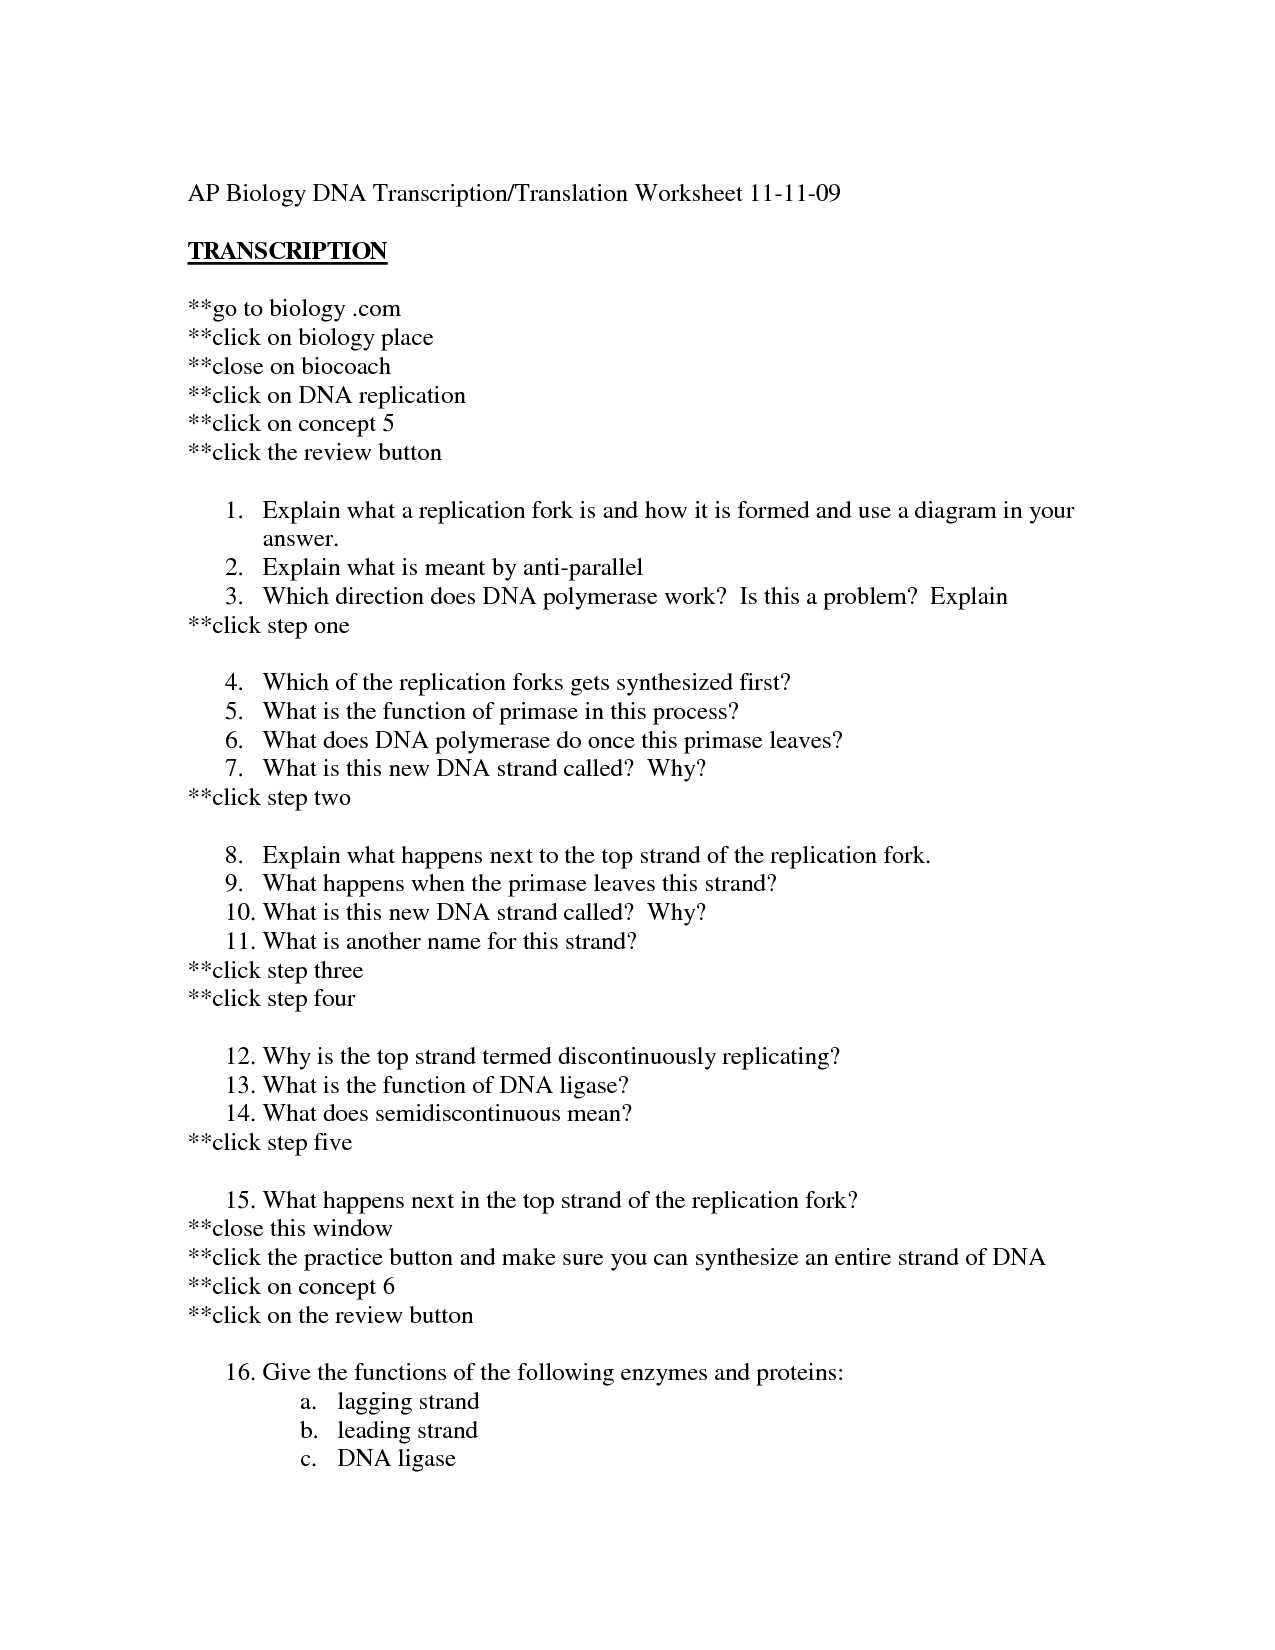 Characteristics Of Bacteria Worksheet Answers with Dna the Molecule Heredity Worksheet Answers the Best Worksheets